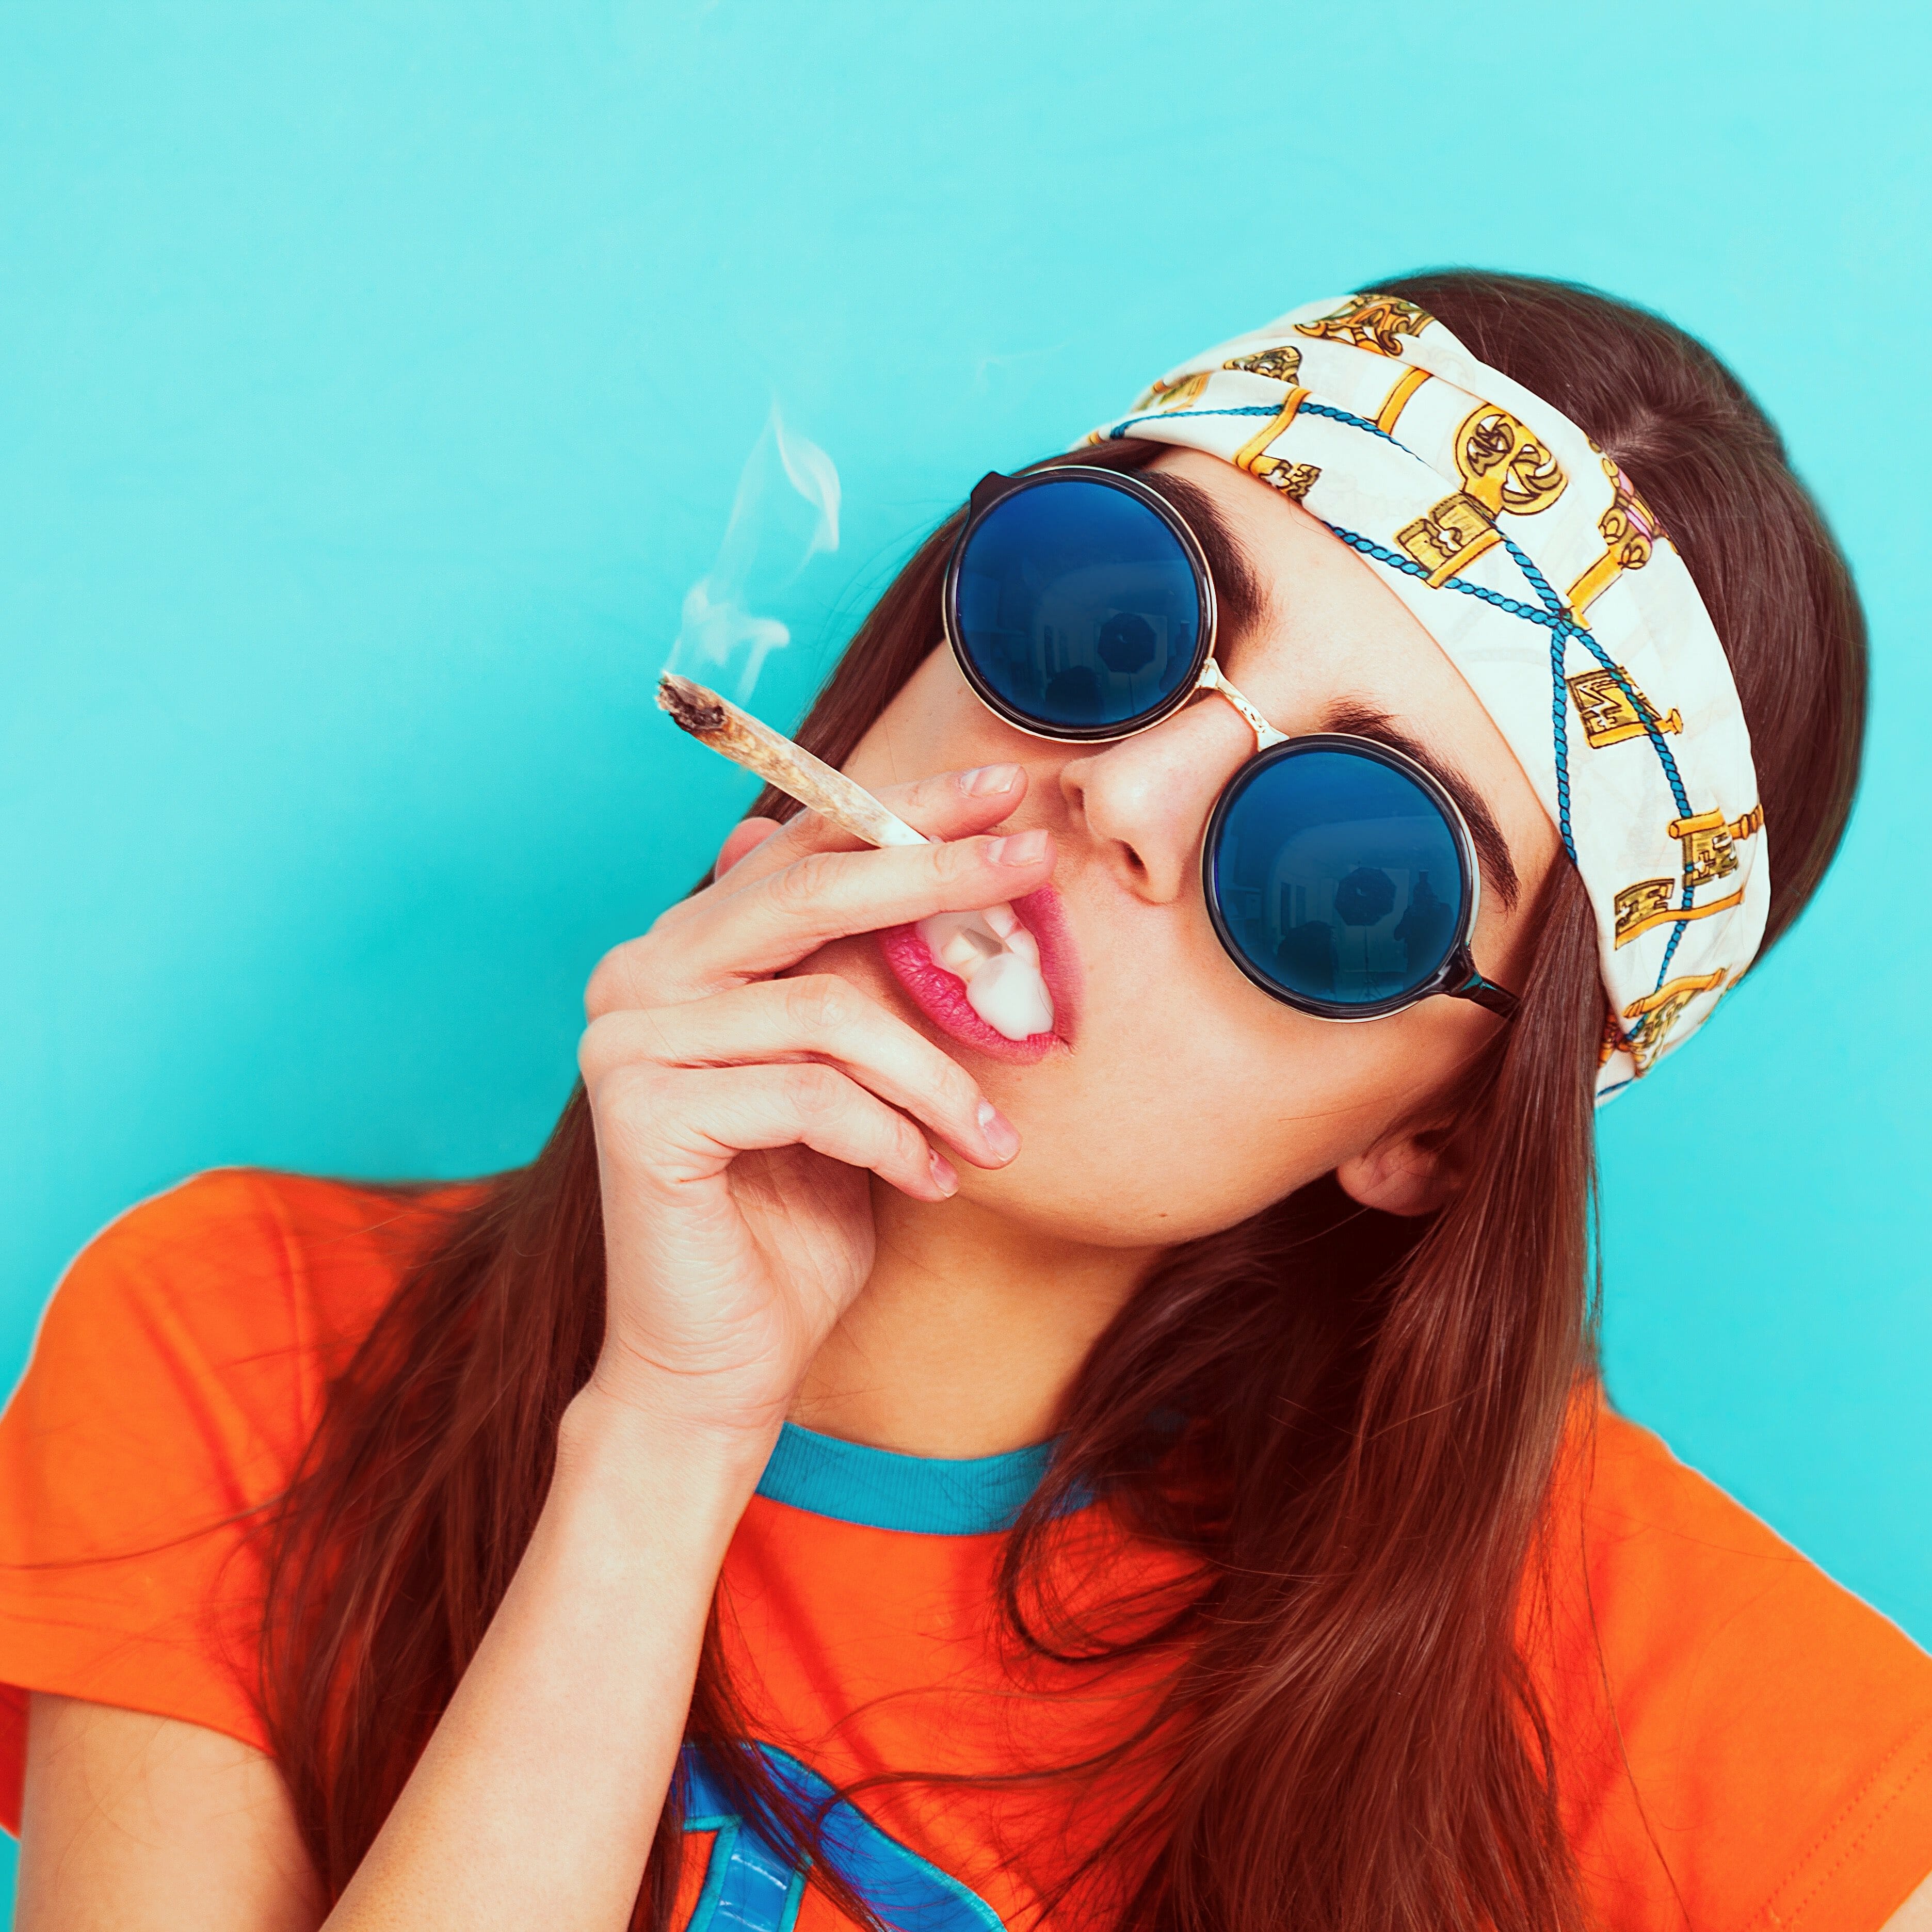 Cannabis Connection: Does Weed Make You Dumb?